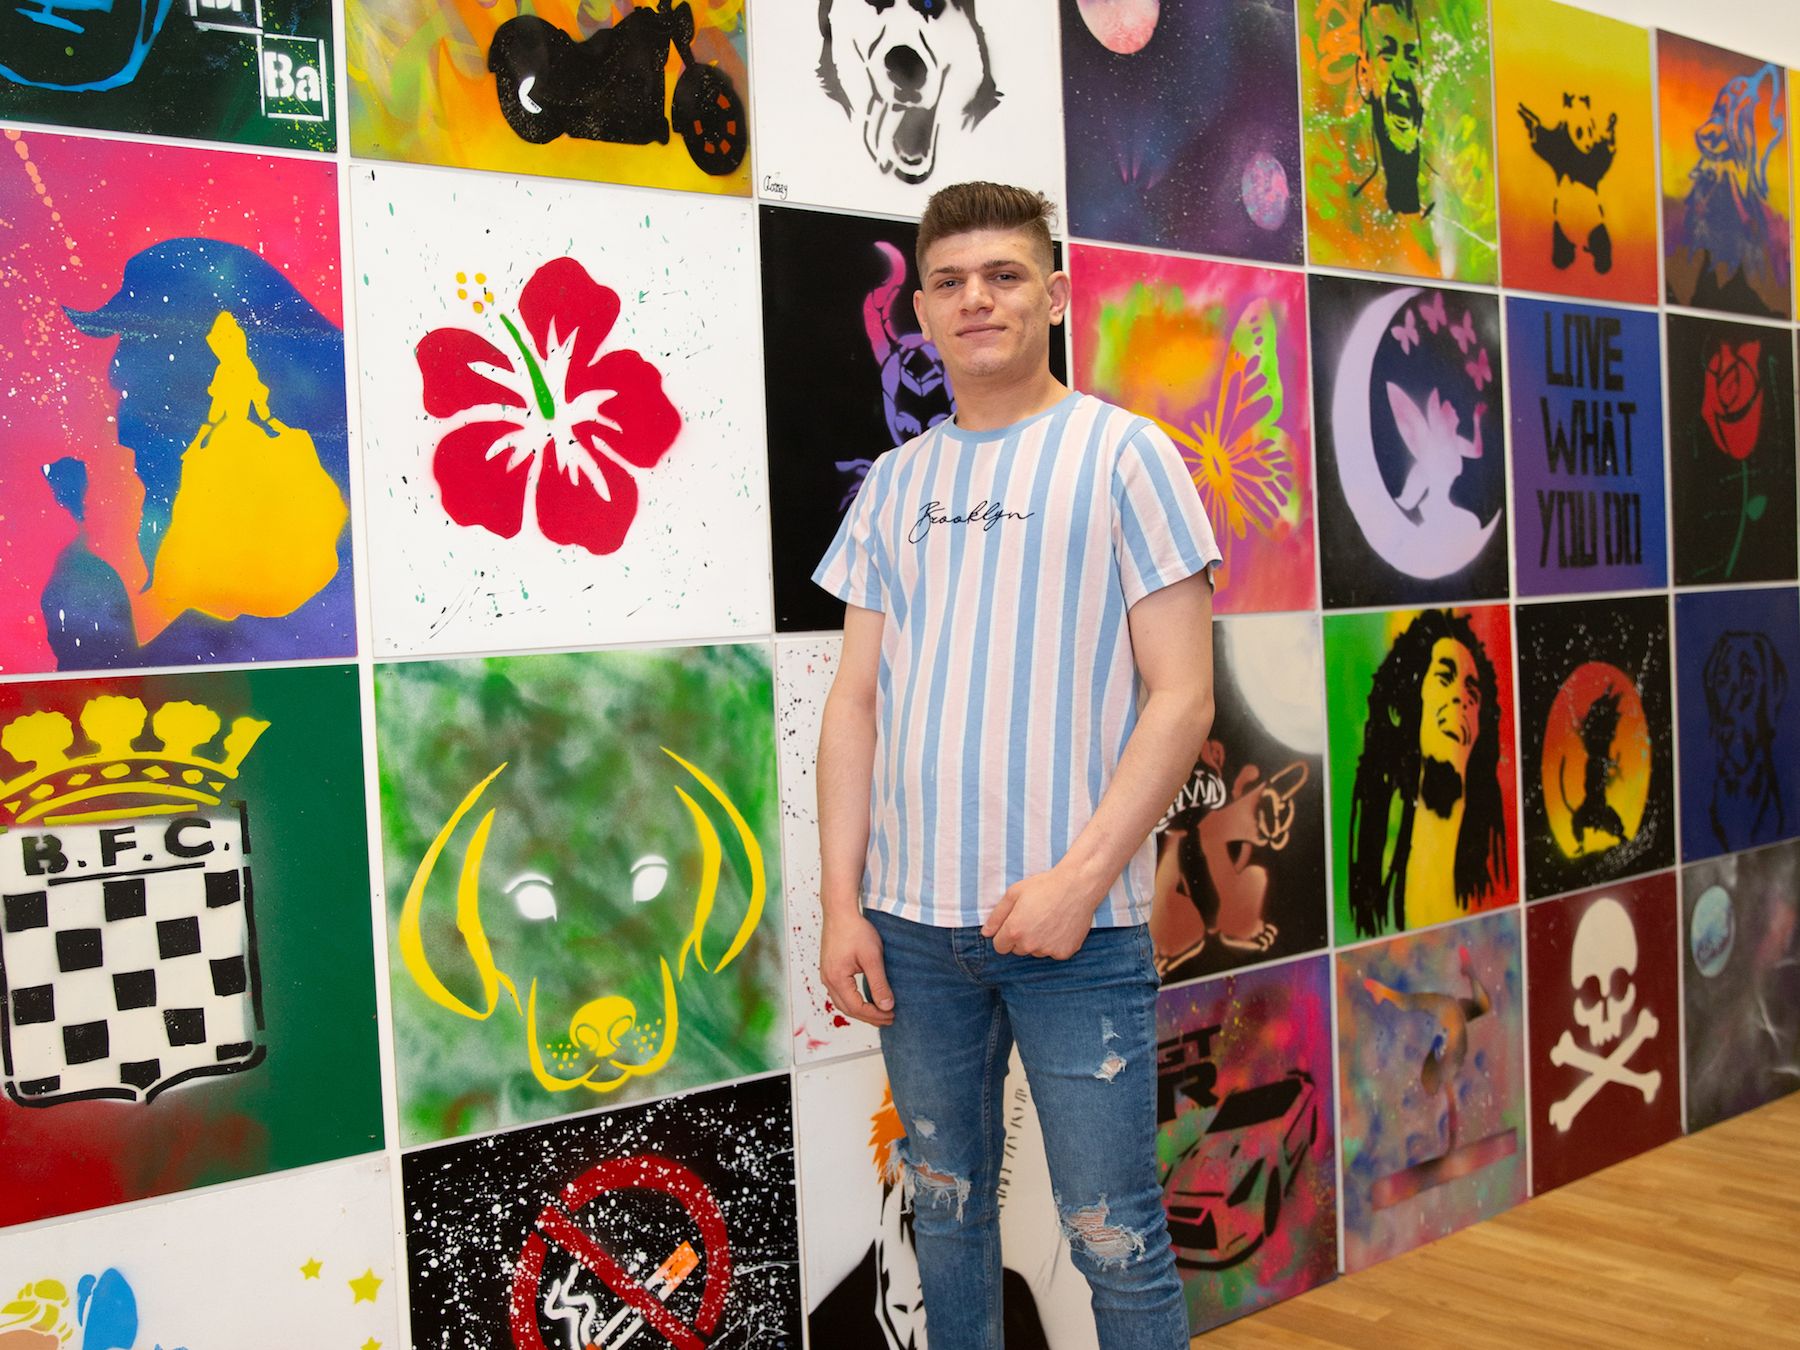 young person from Youthscape project with colourful artwork displayed in the background